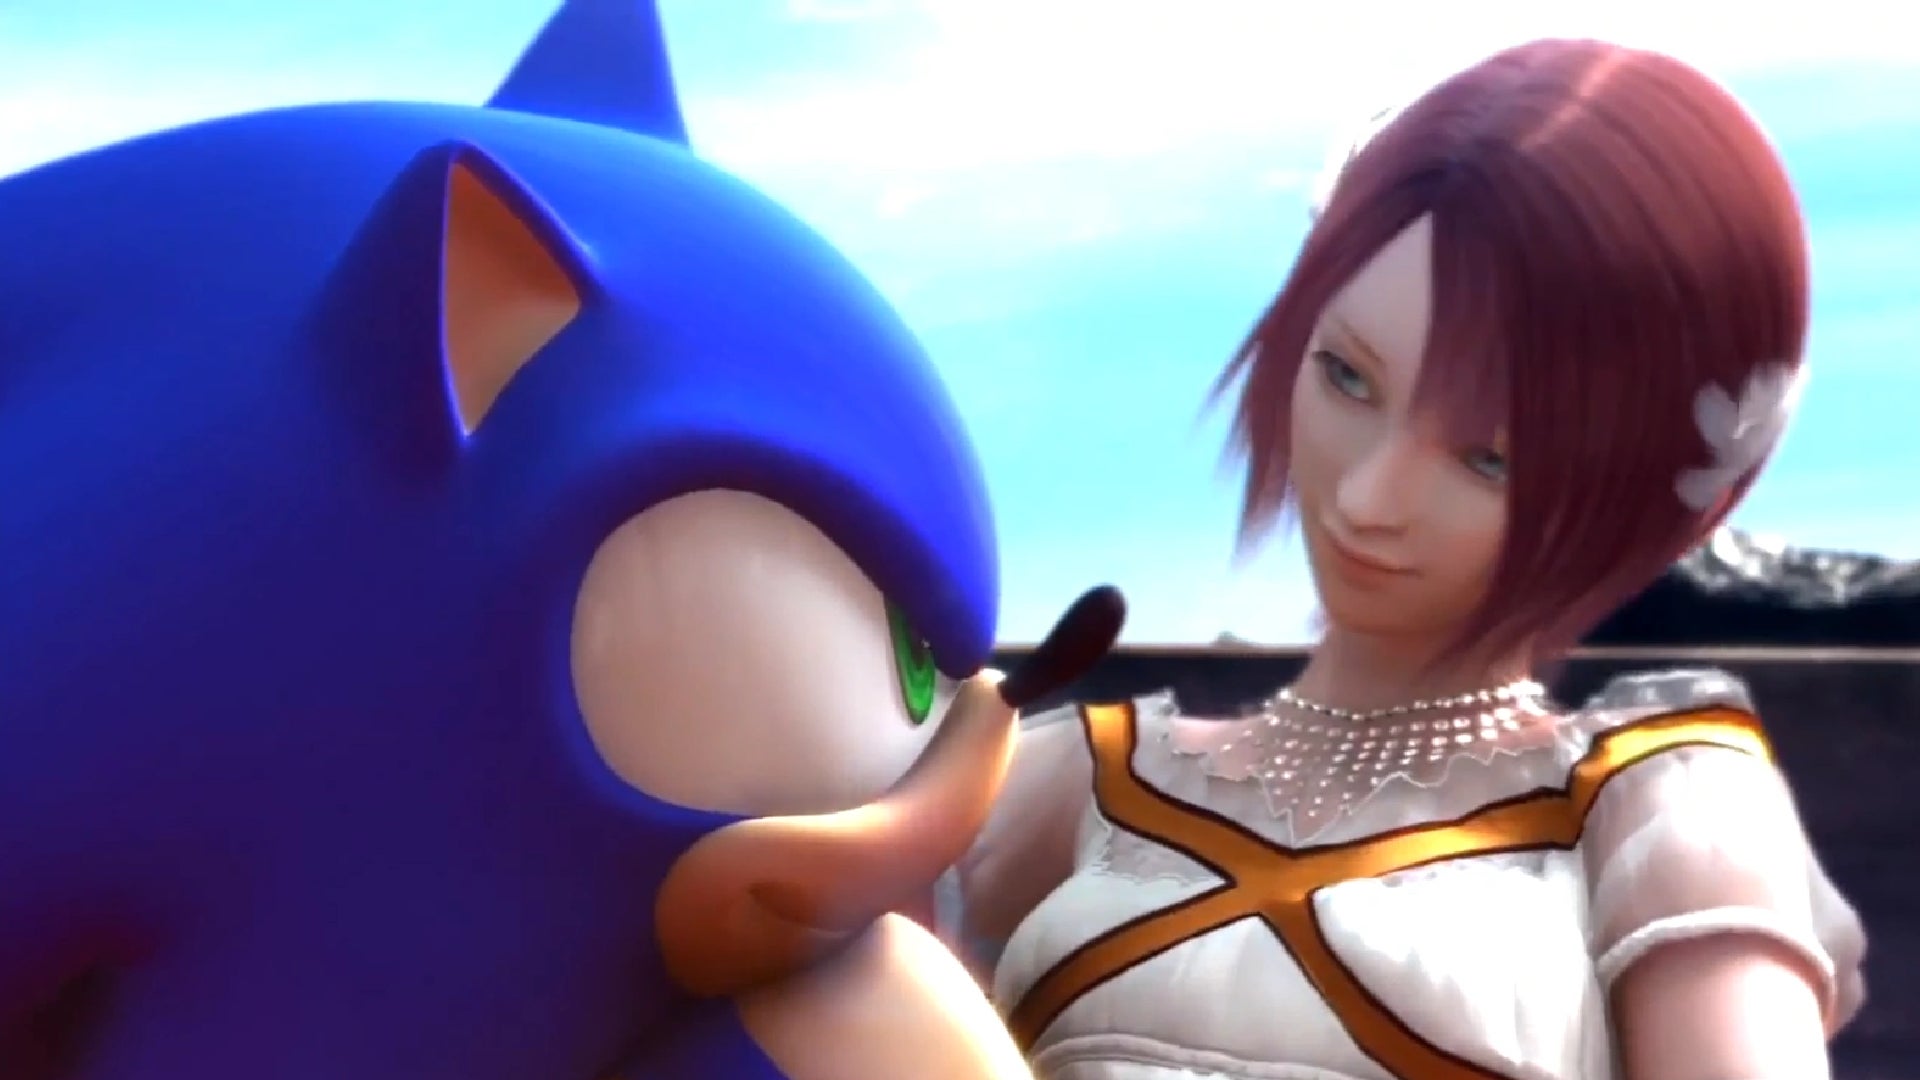 Image for Don't worry, Sonic won't be kissing any more human women